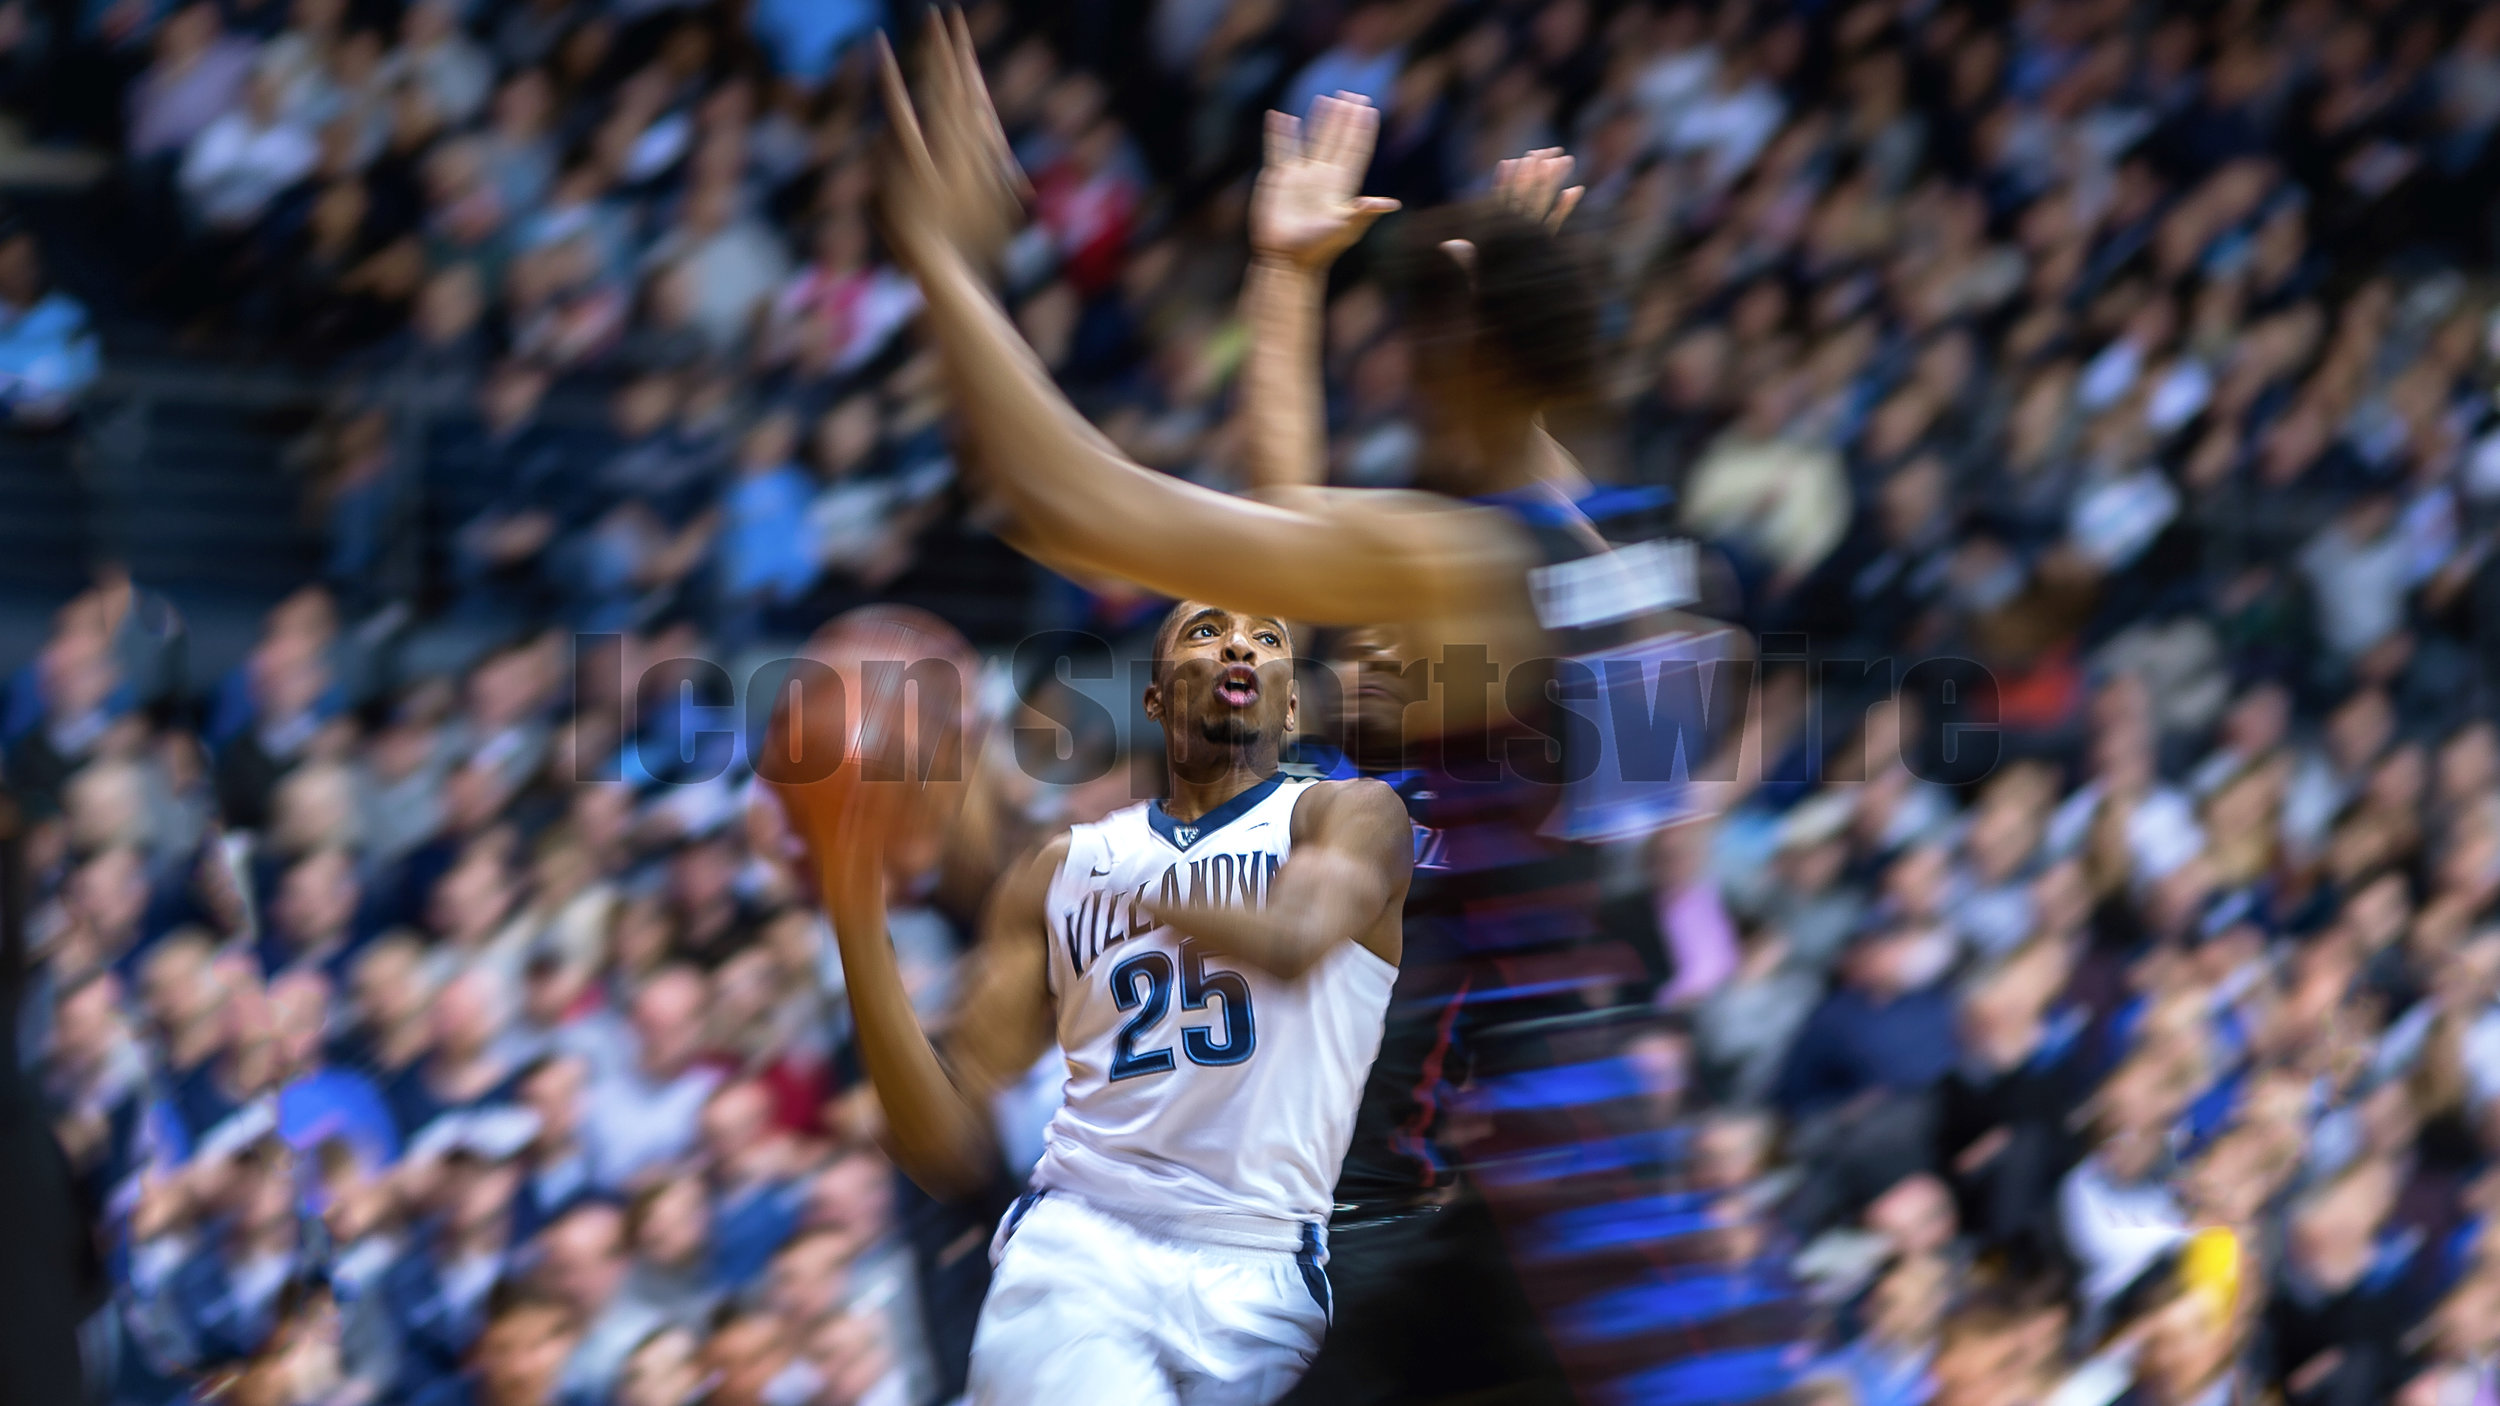  VILLANOVA, PA - DECEMBER 28: &nbsp;Villanova Wildcats guard Mikal Bridges (25) charges towards the net in a blur during the game between the Villanova Wildcats and the DePaul Blue Demons on December 28, 2016 at The Pavilion in Villanova PA.(Photo by